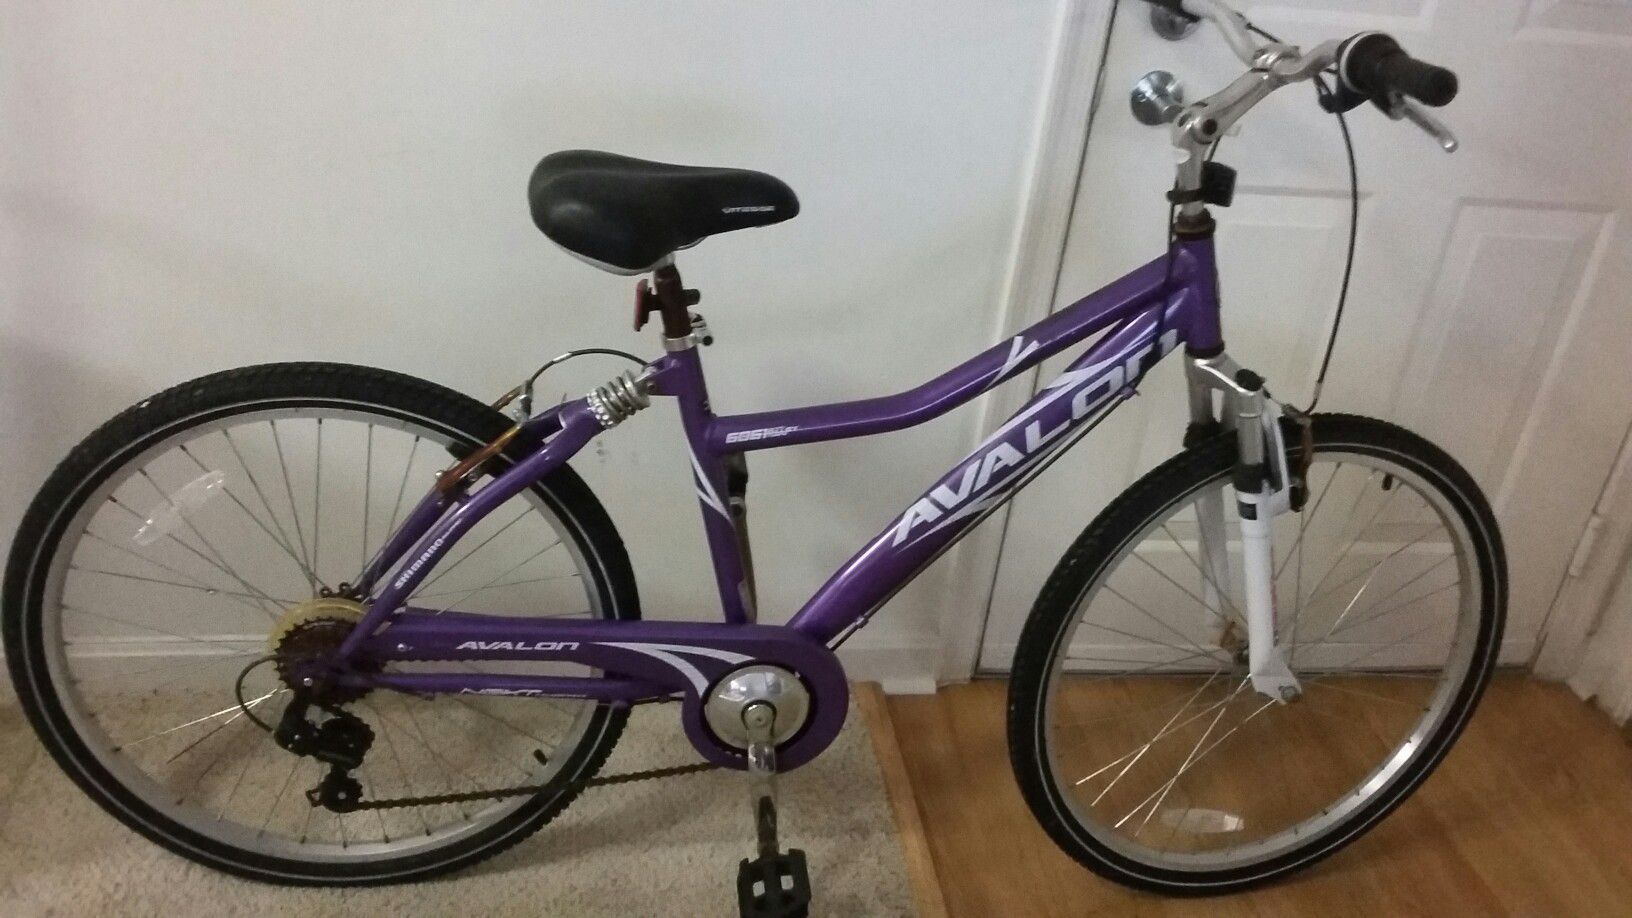 BEAUTIFUL BICYCLE AVALON 6061 ATT 7 SHIFT SPEEDS DUAL SHX SERIES 2.6 LIKE NEW EXCELLENT CONDITION